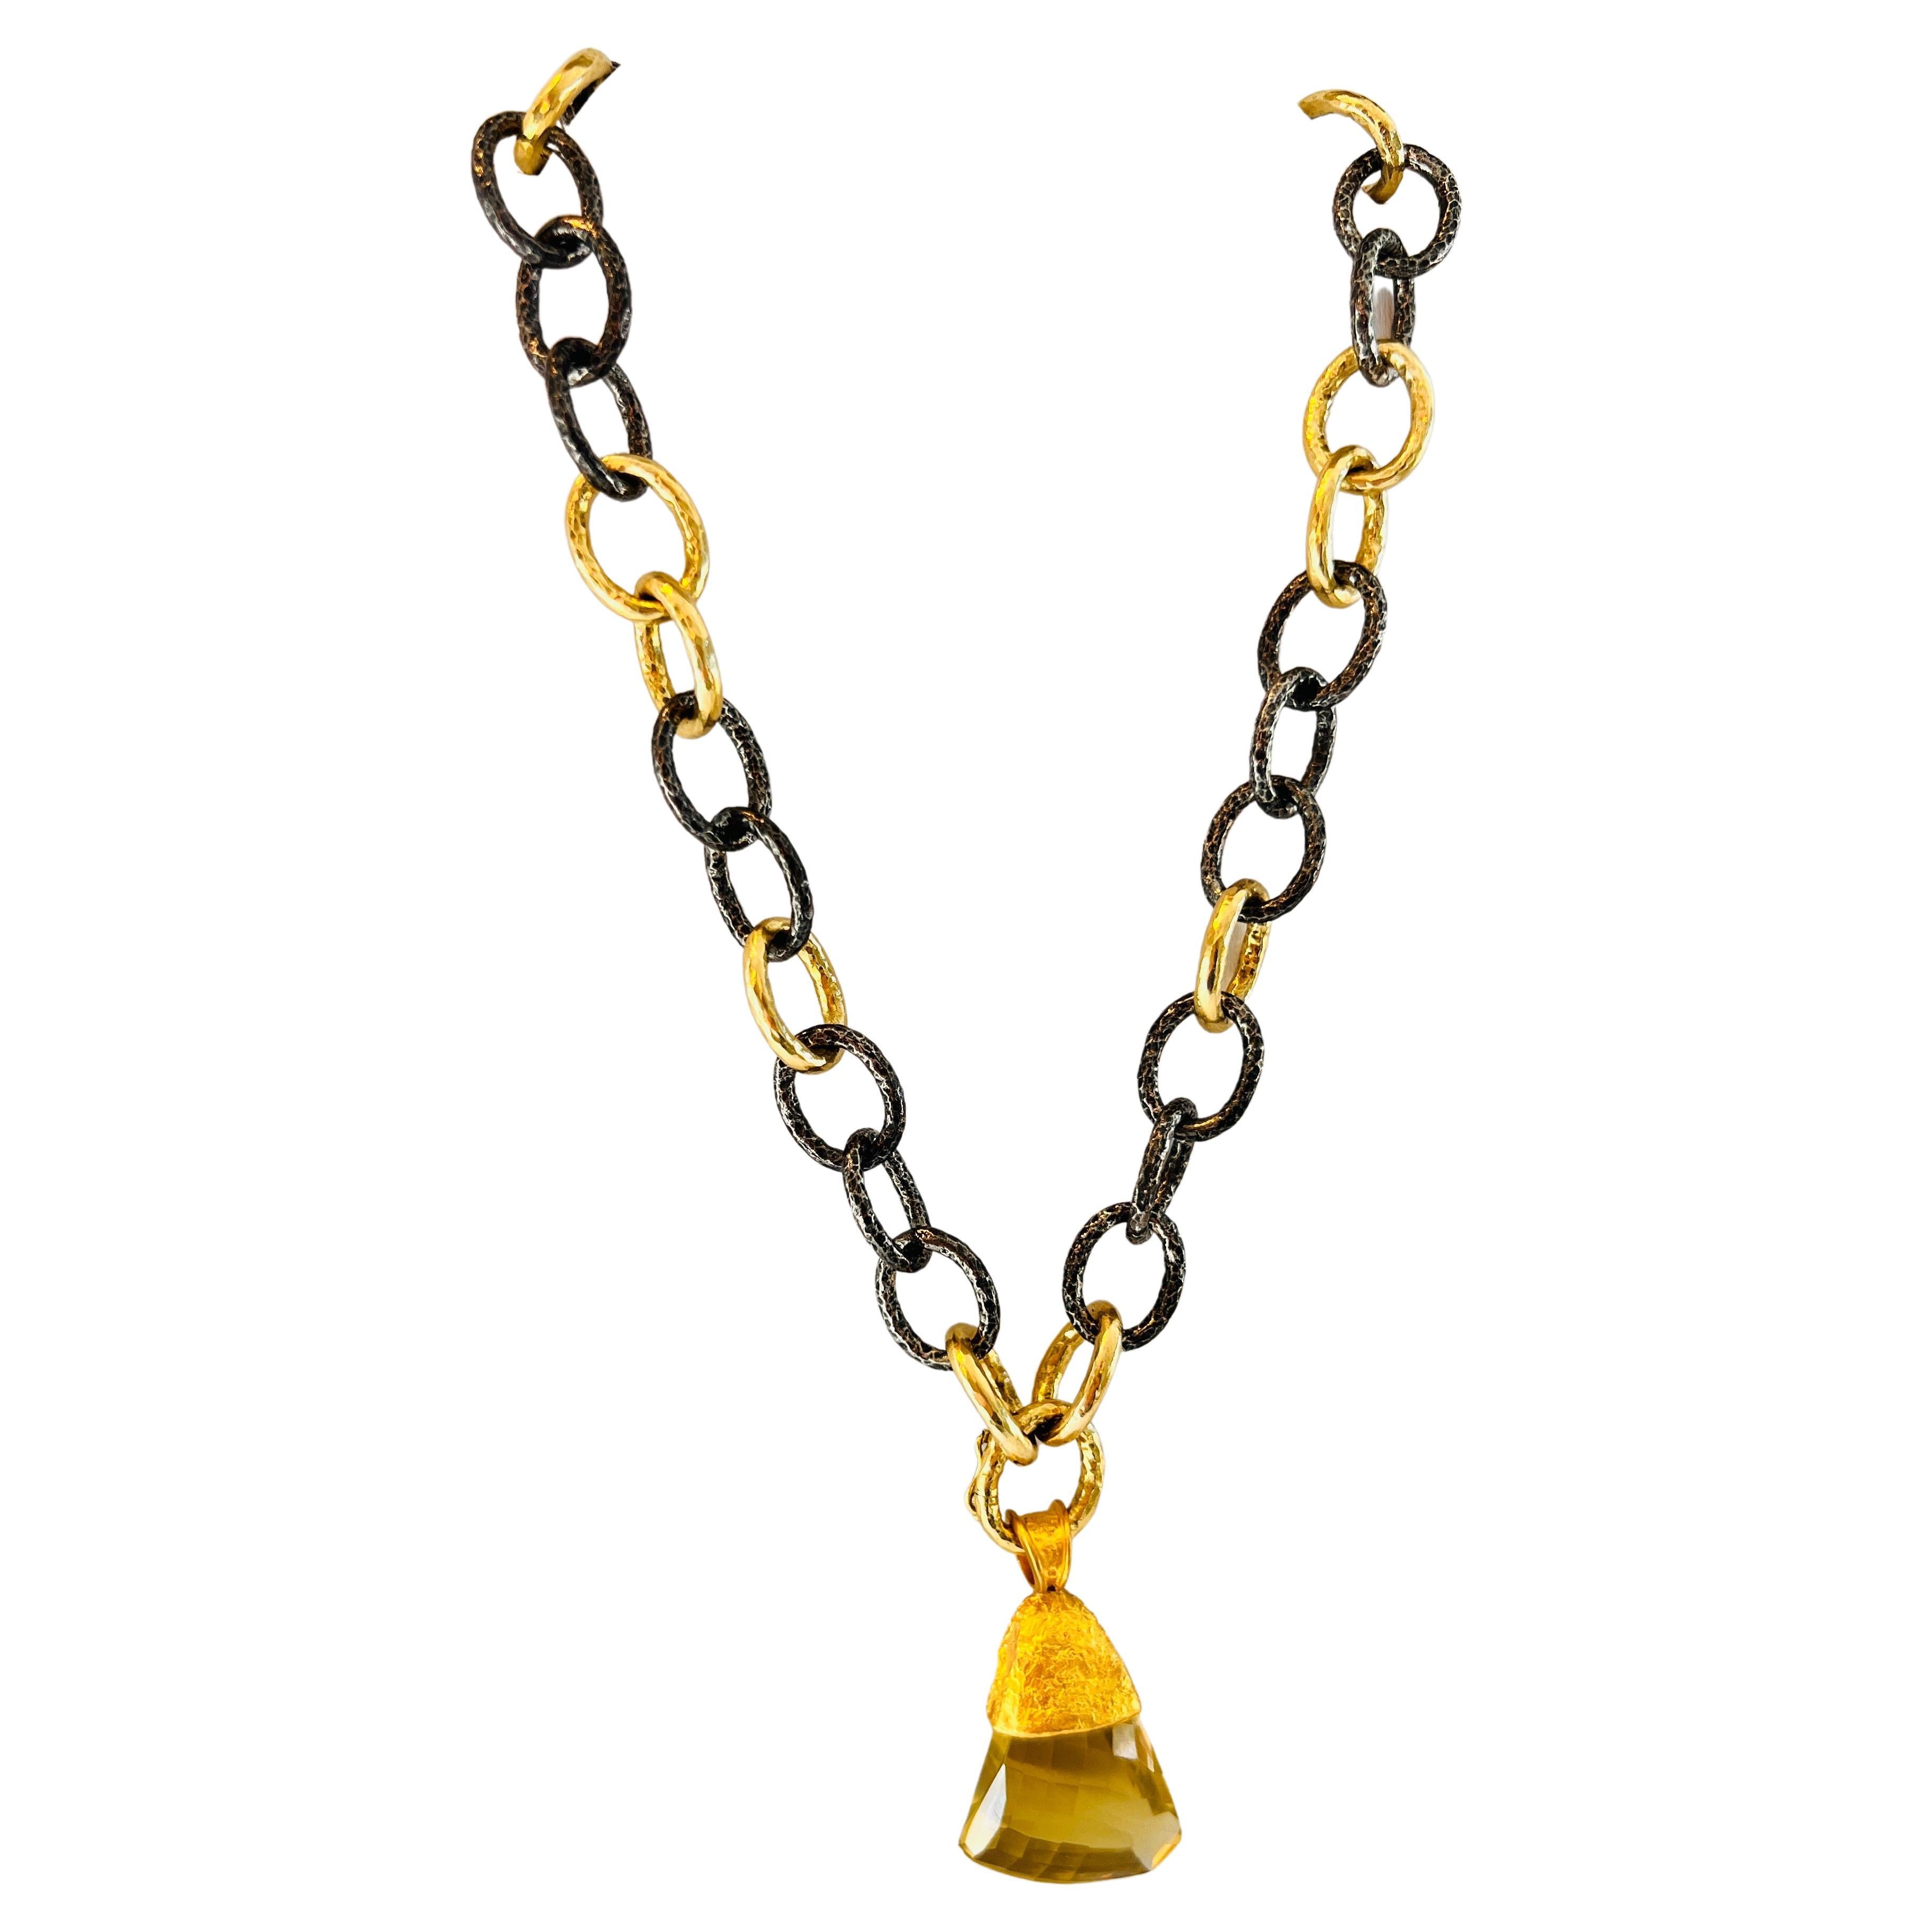 The 50/50 Blackened Silver and Gold 16" Chain Necklace, by Tagili For Sale